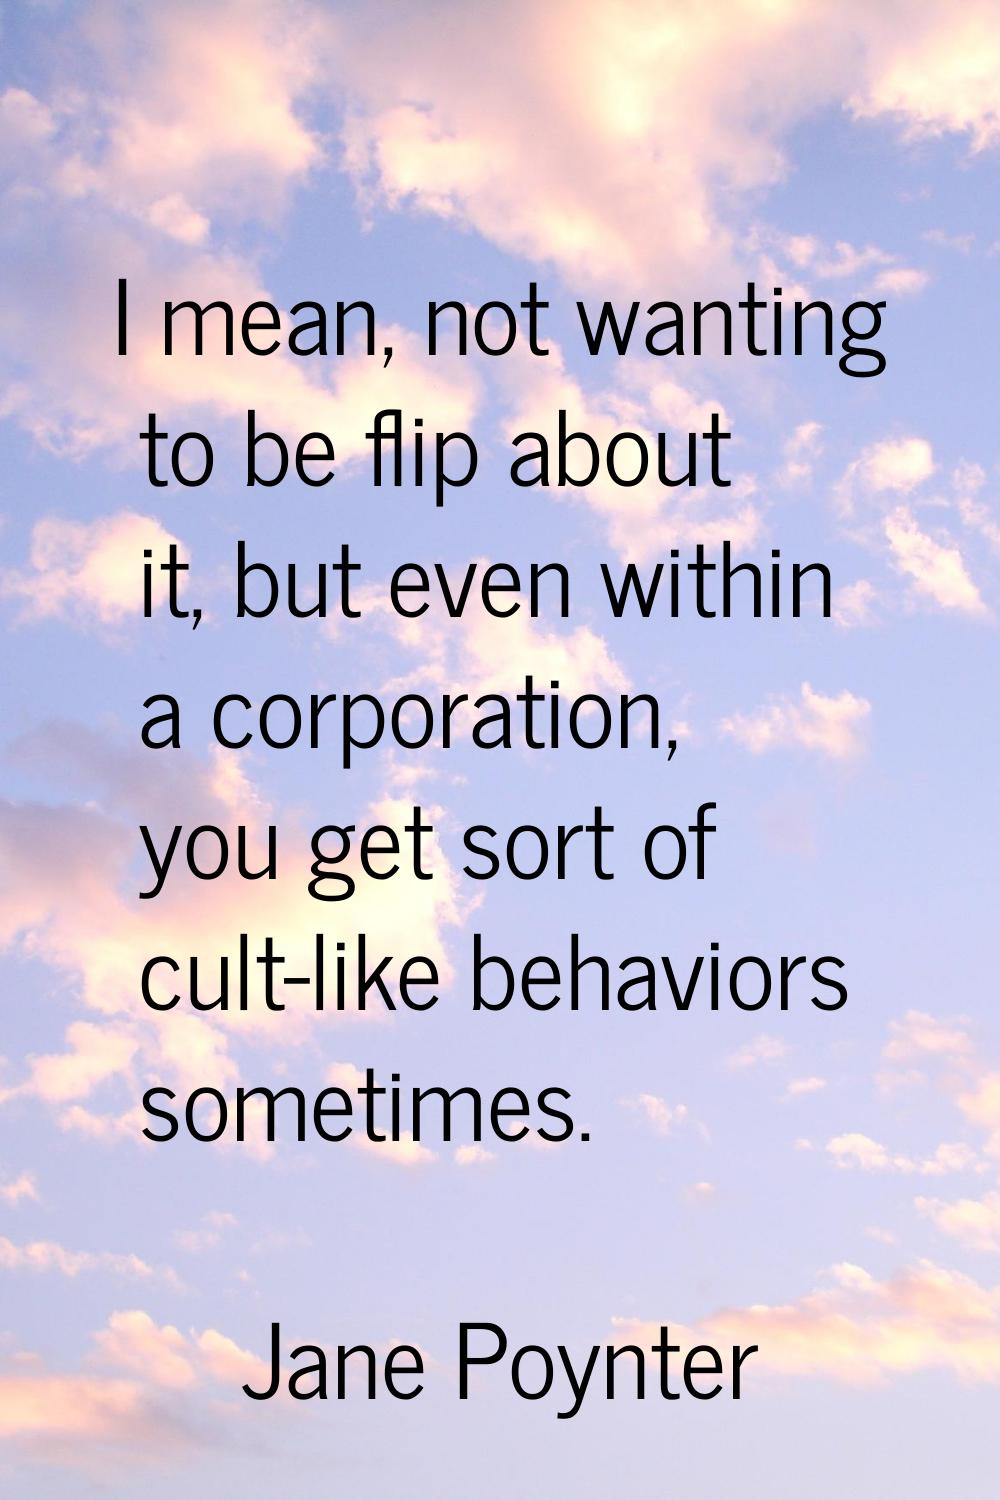 I mean, not wanting to be flip about it, but even within a corporation, you get sort of cult-like b